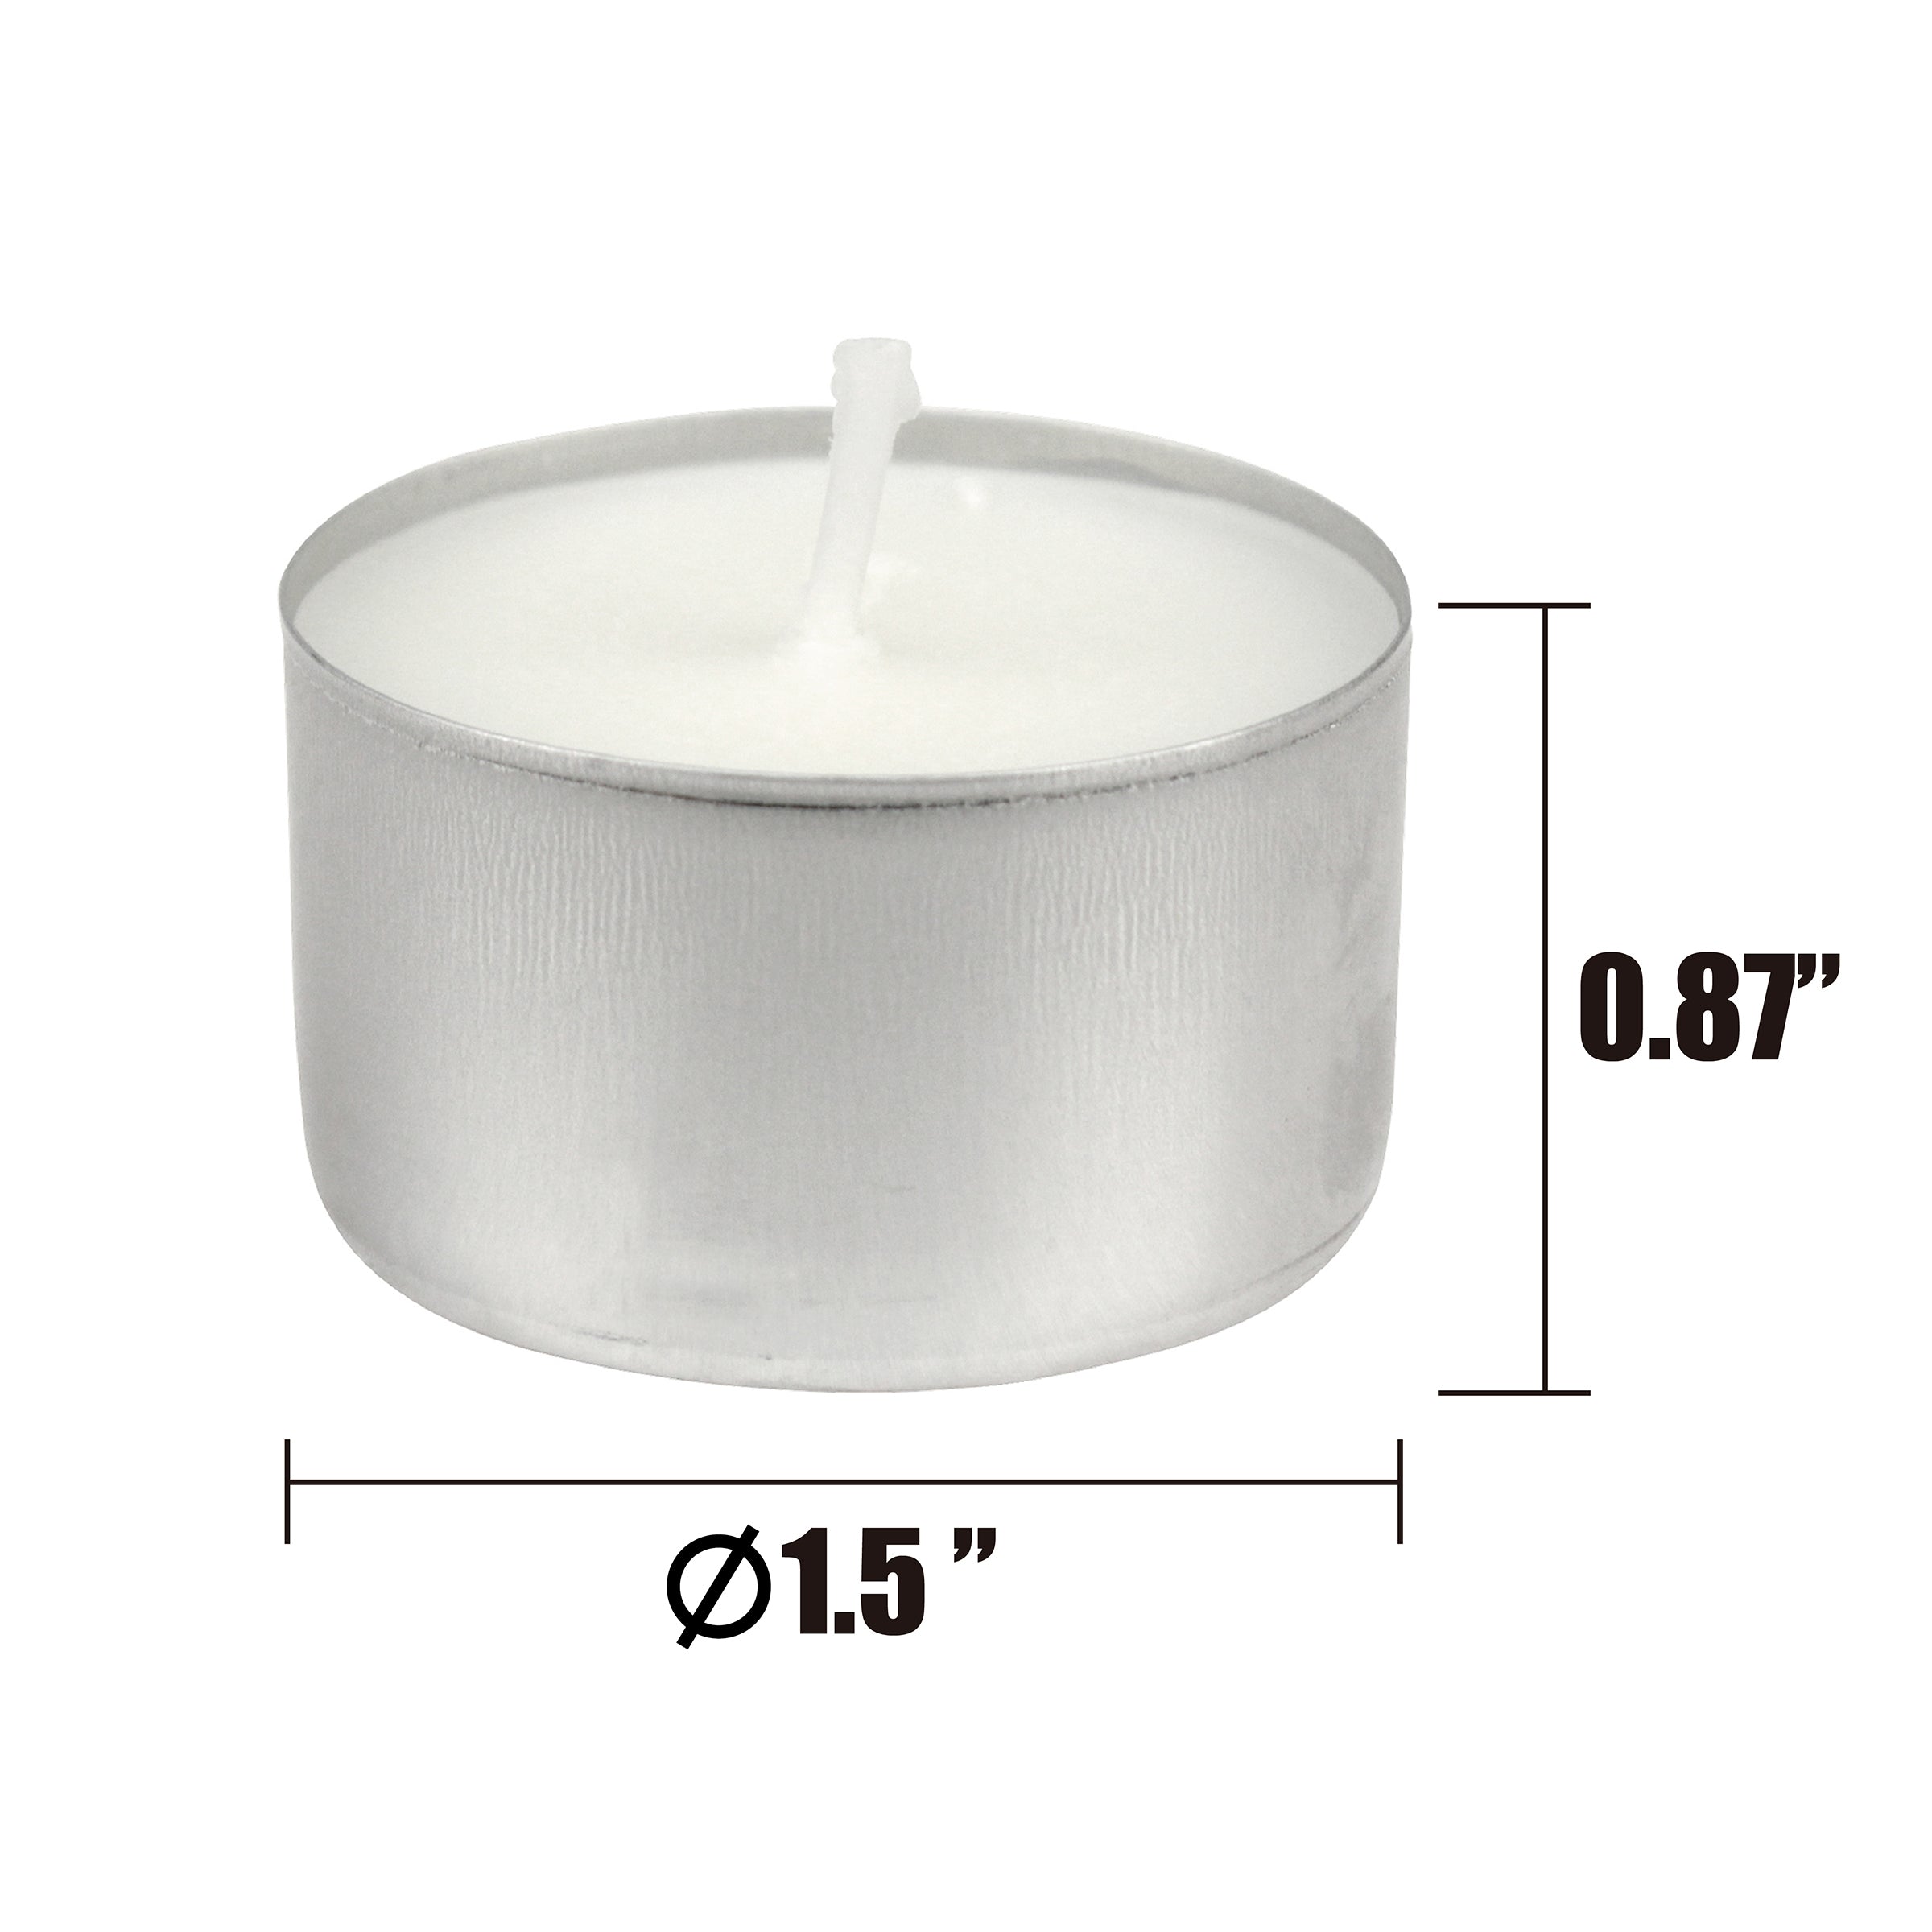 Stonebriar Long Burning Tealight Candles - 8 Hours - White - Unscented - 100 Pack